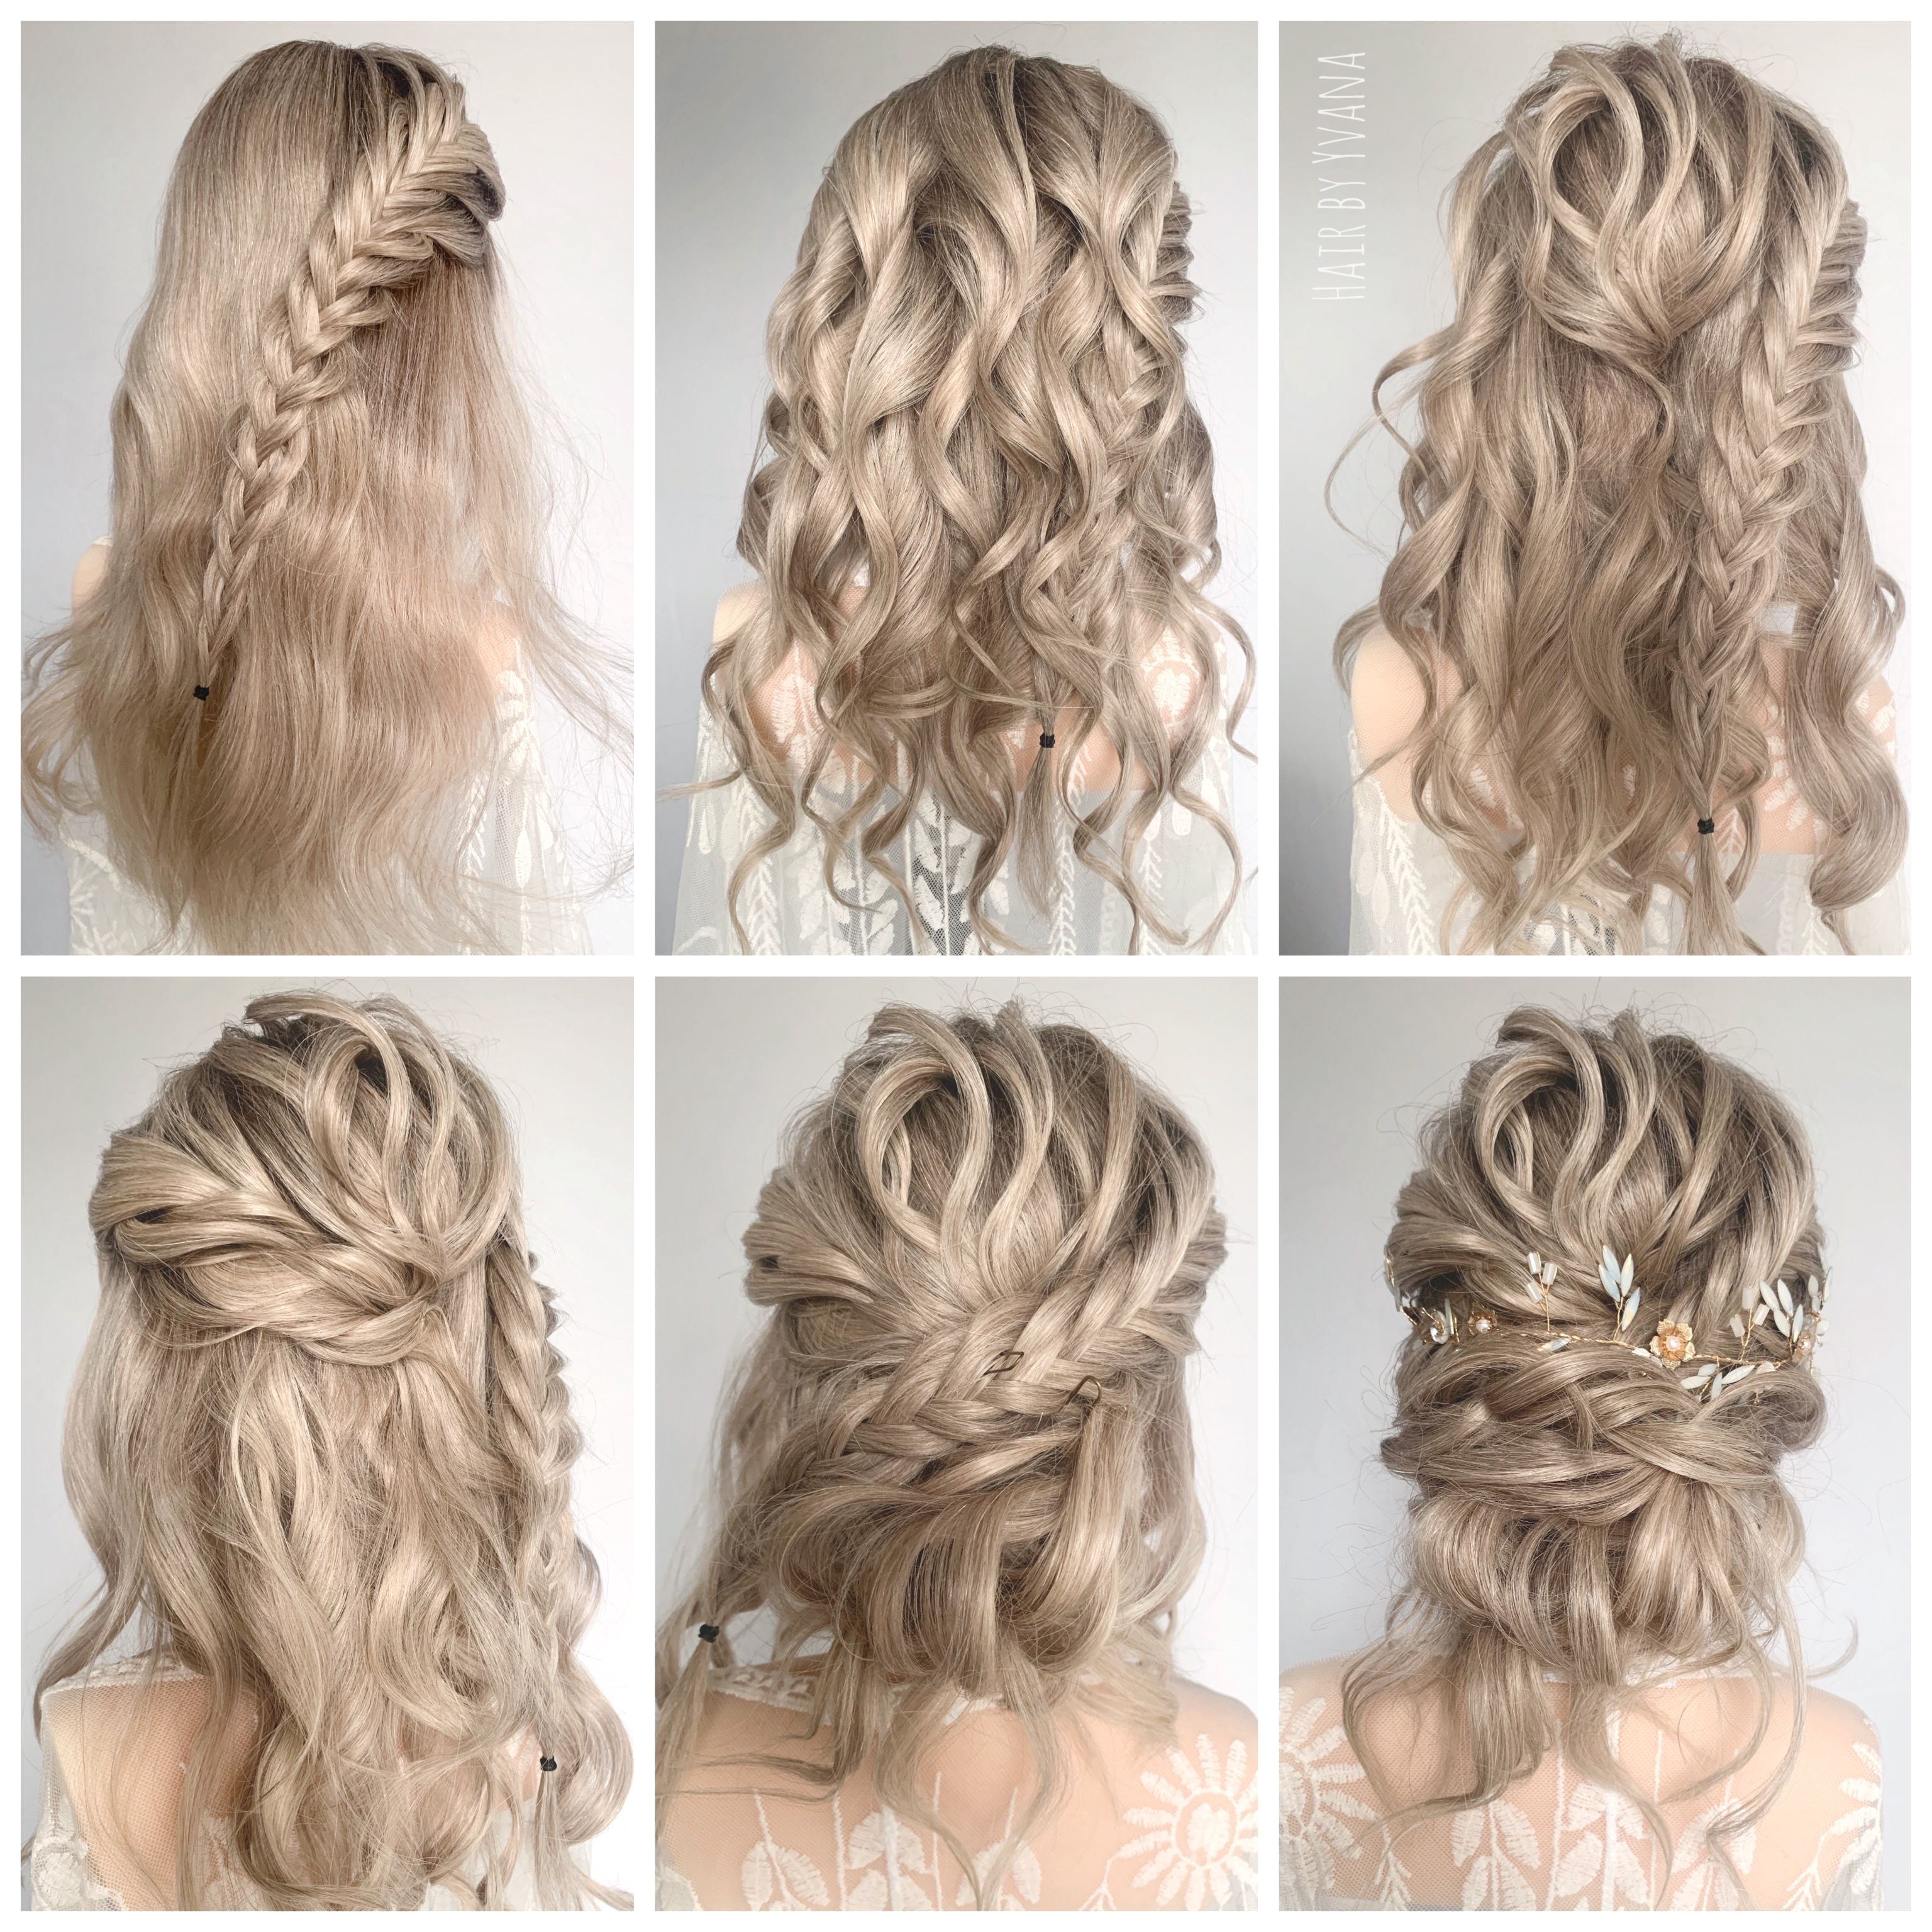 Hair tutorial -   16 hairstyles Step By Step updo ideas